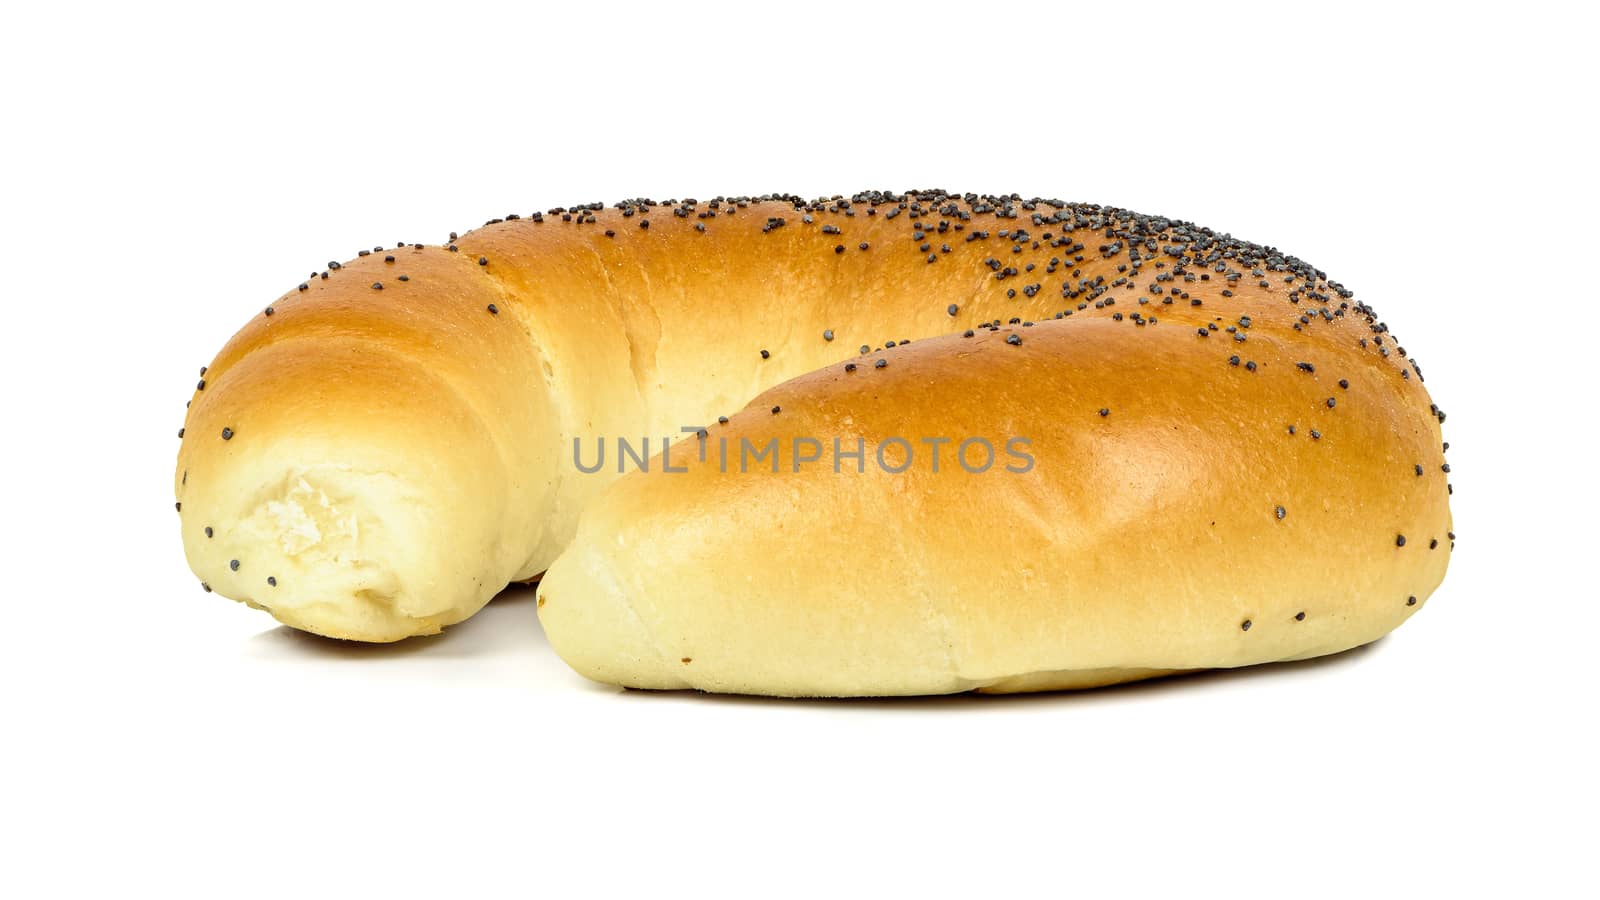 Crescent roll with poppy seeds isolated on white background with clipping path